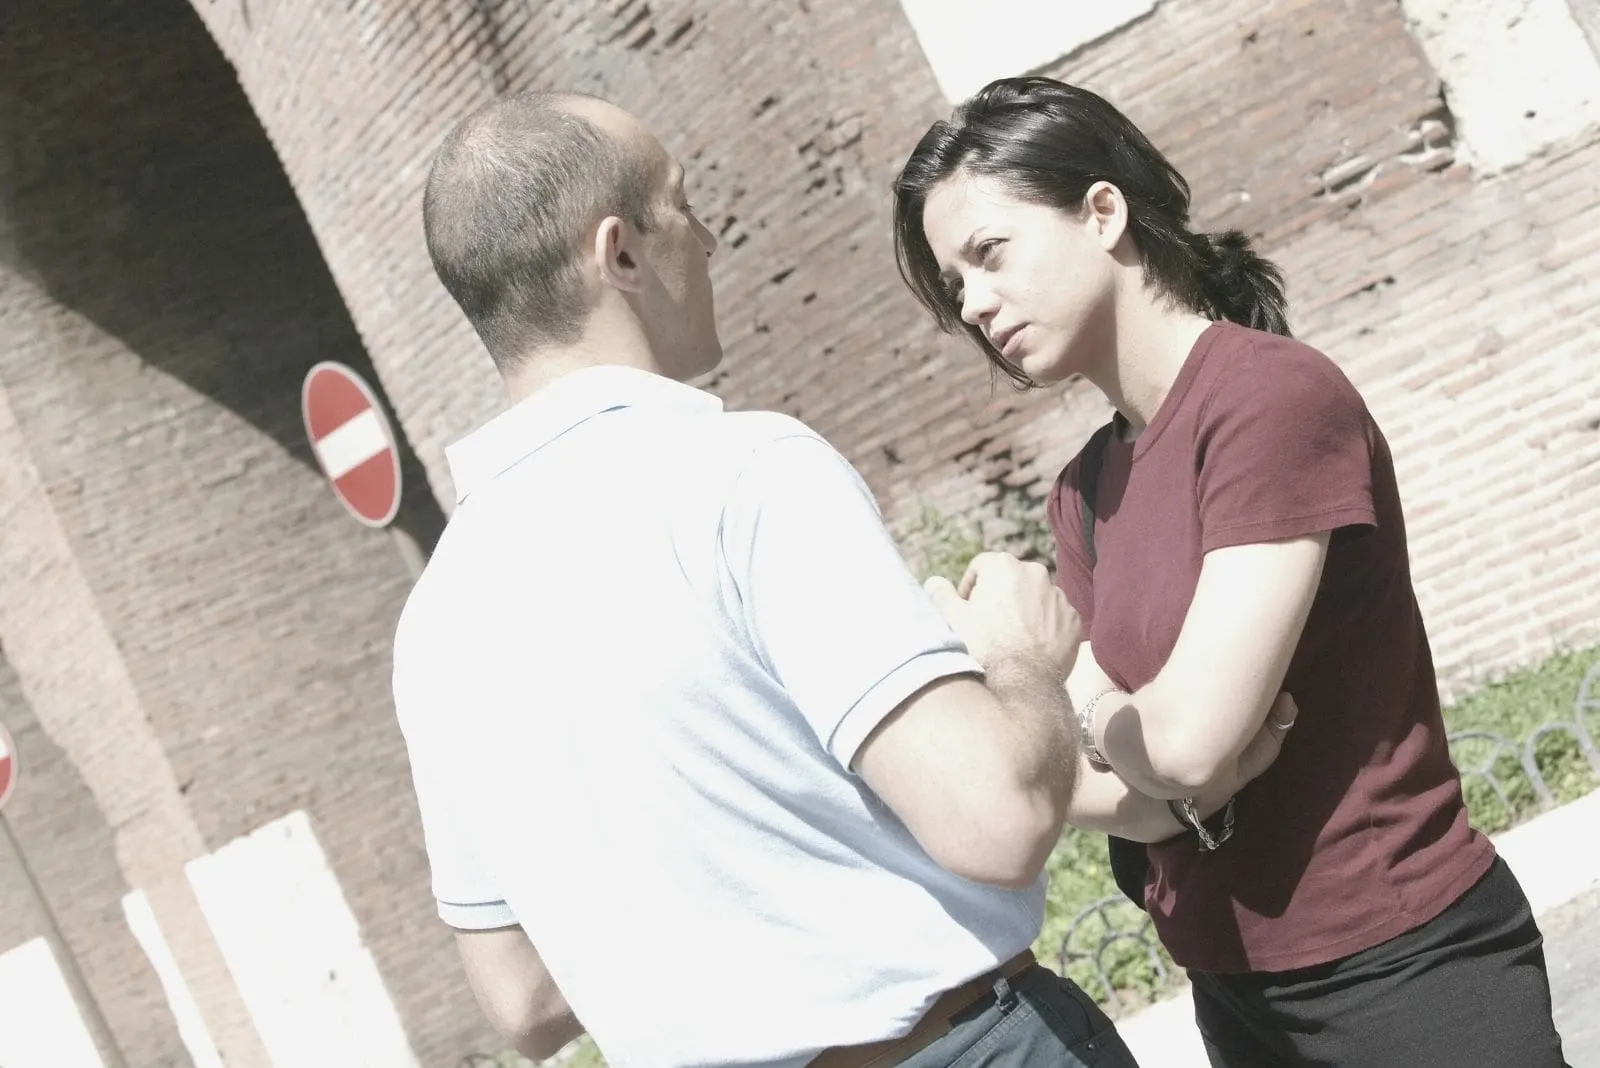 couple arguing outside of the building with red brick walls